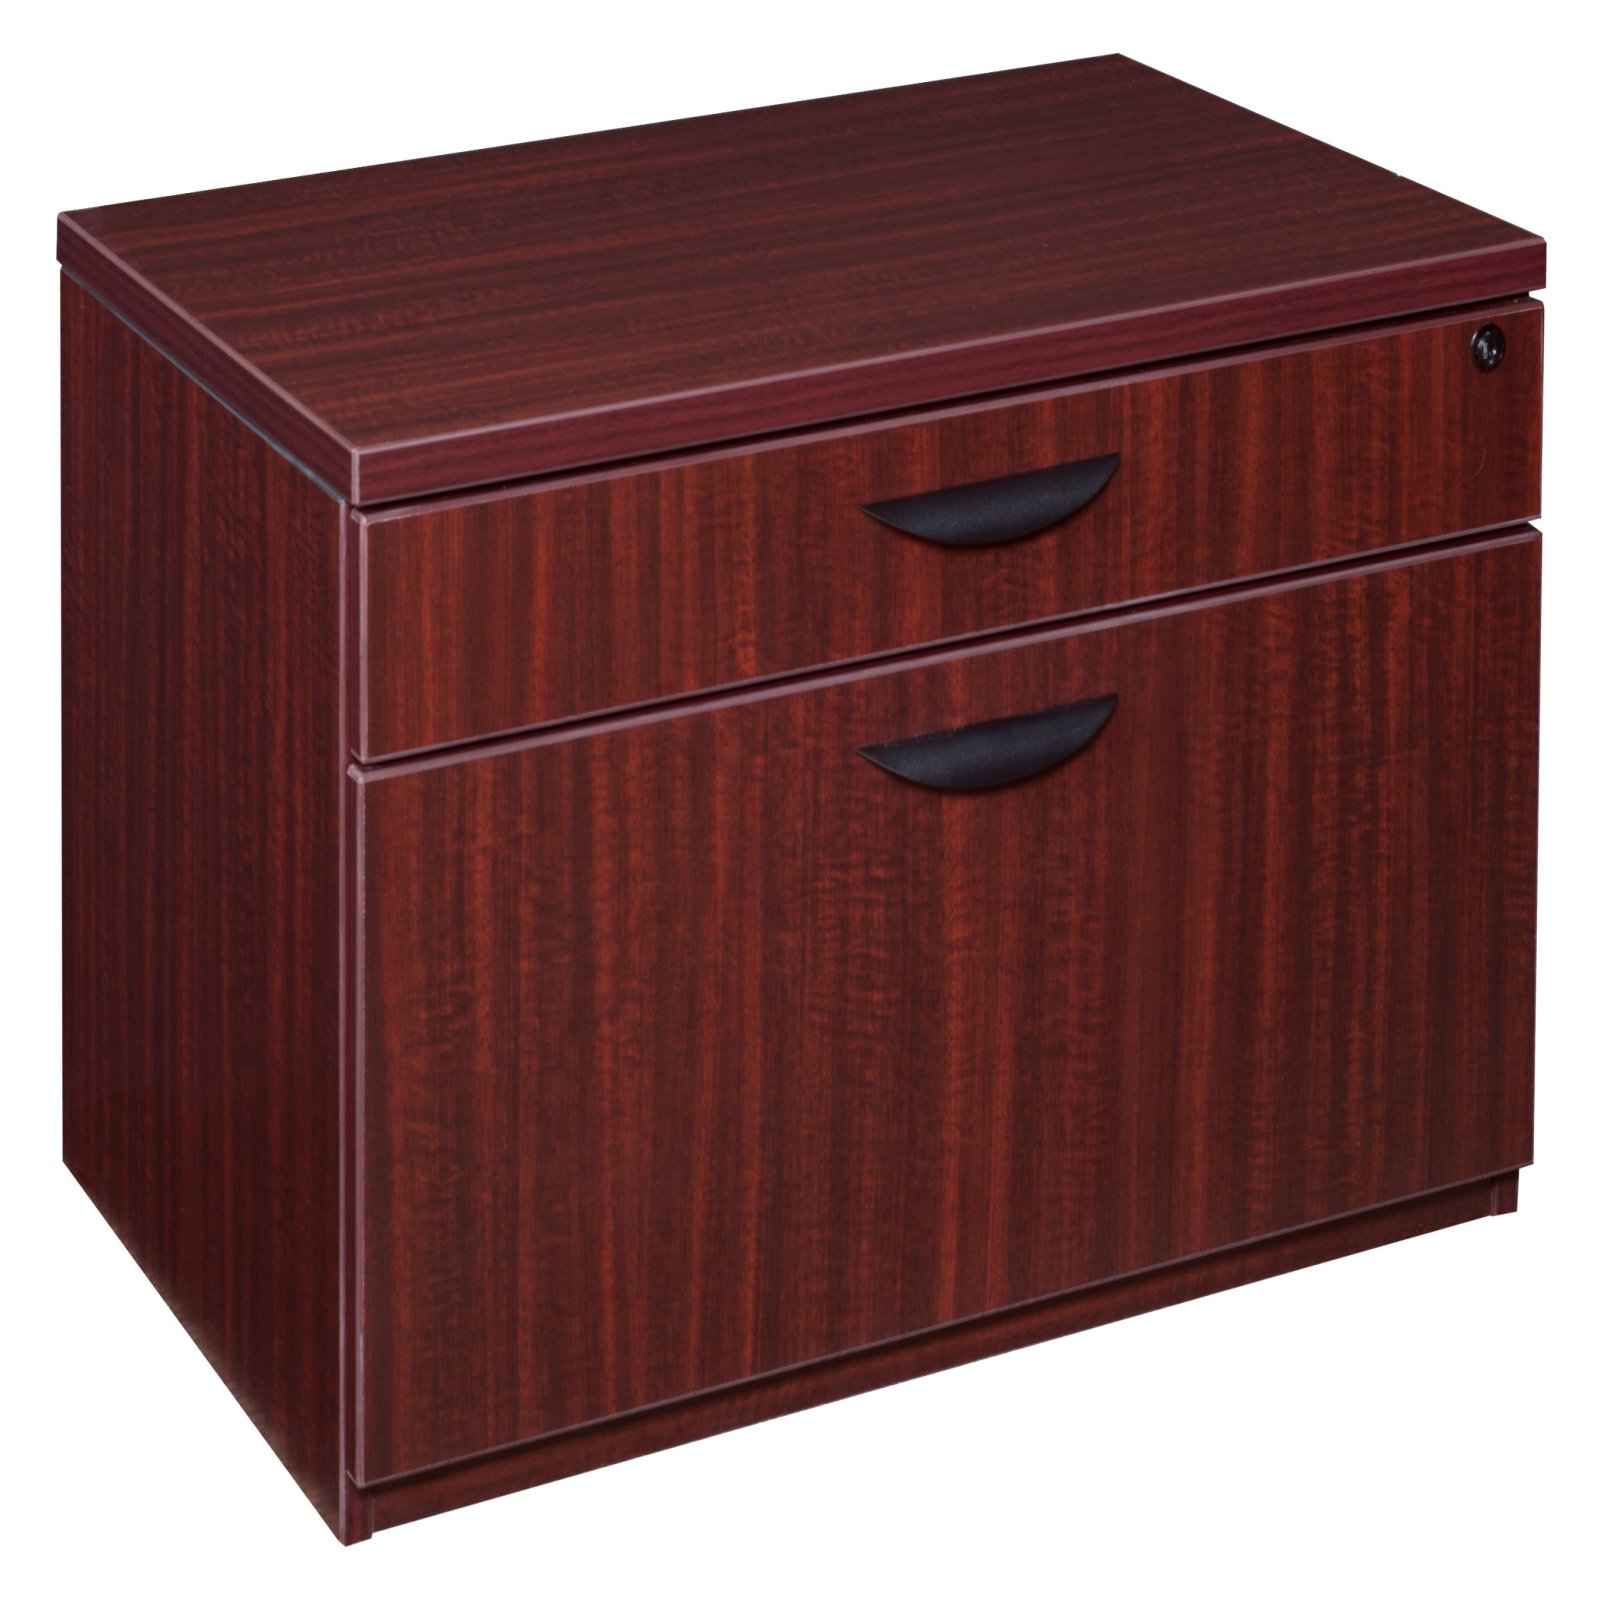 Regency Legacy 20 in. 2 Drawer Low Lateral File- Cherry - image 2 of 7